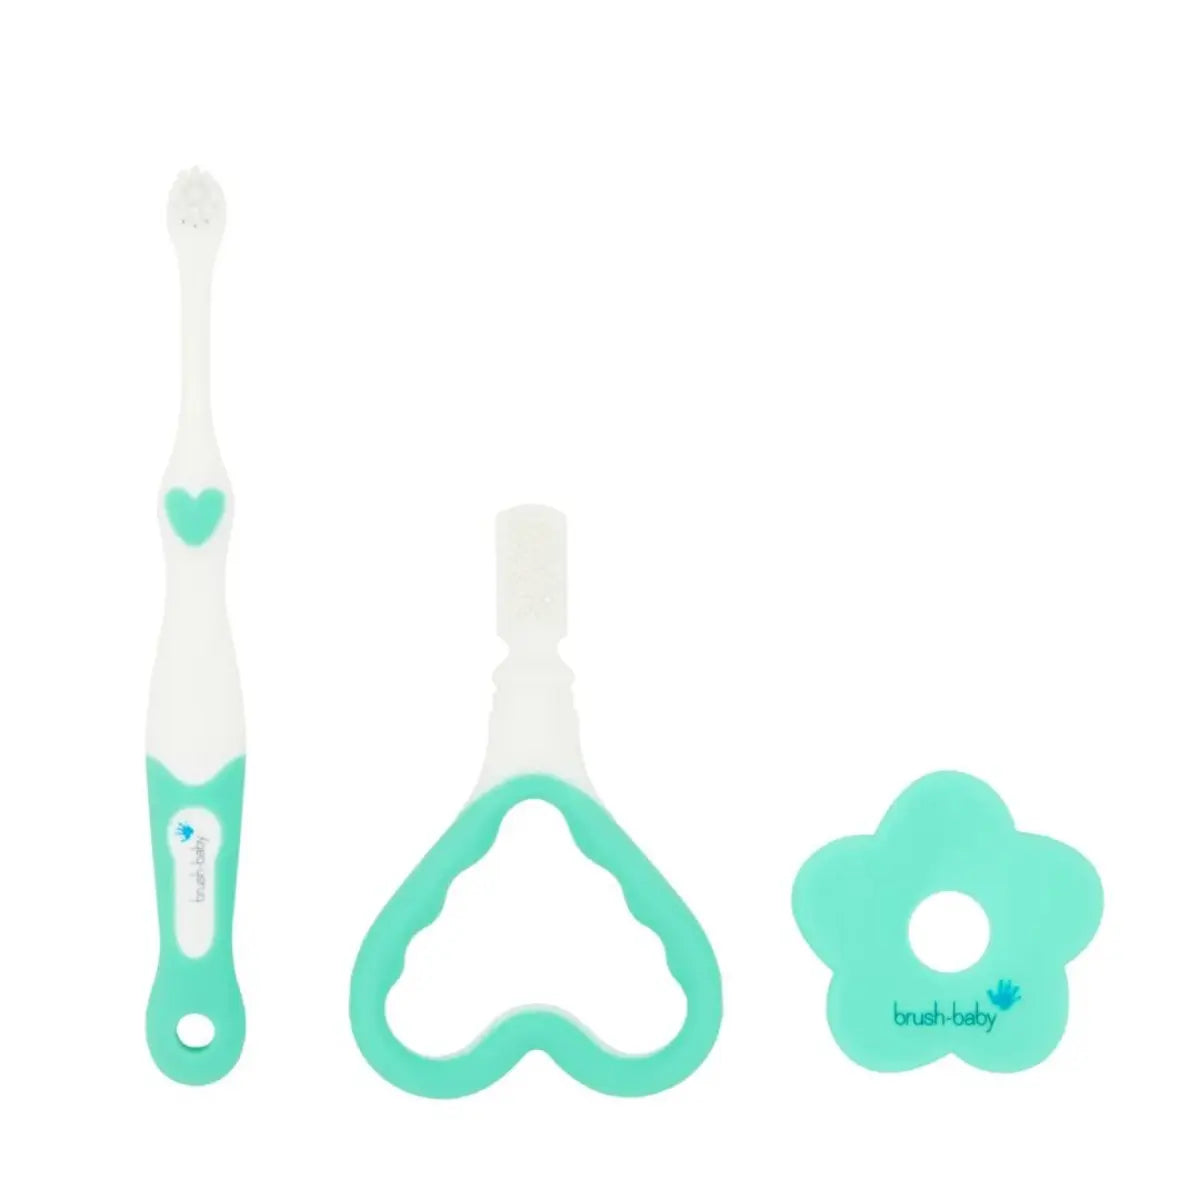 Brush Baby Teal My First baby toothbrush and baby Teether for teething symptoms